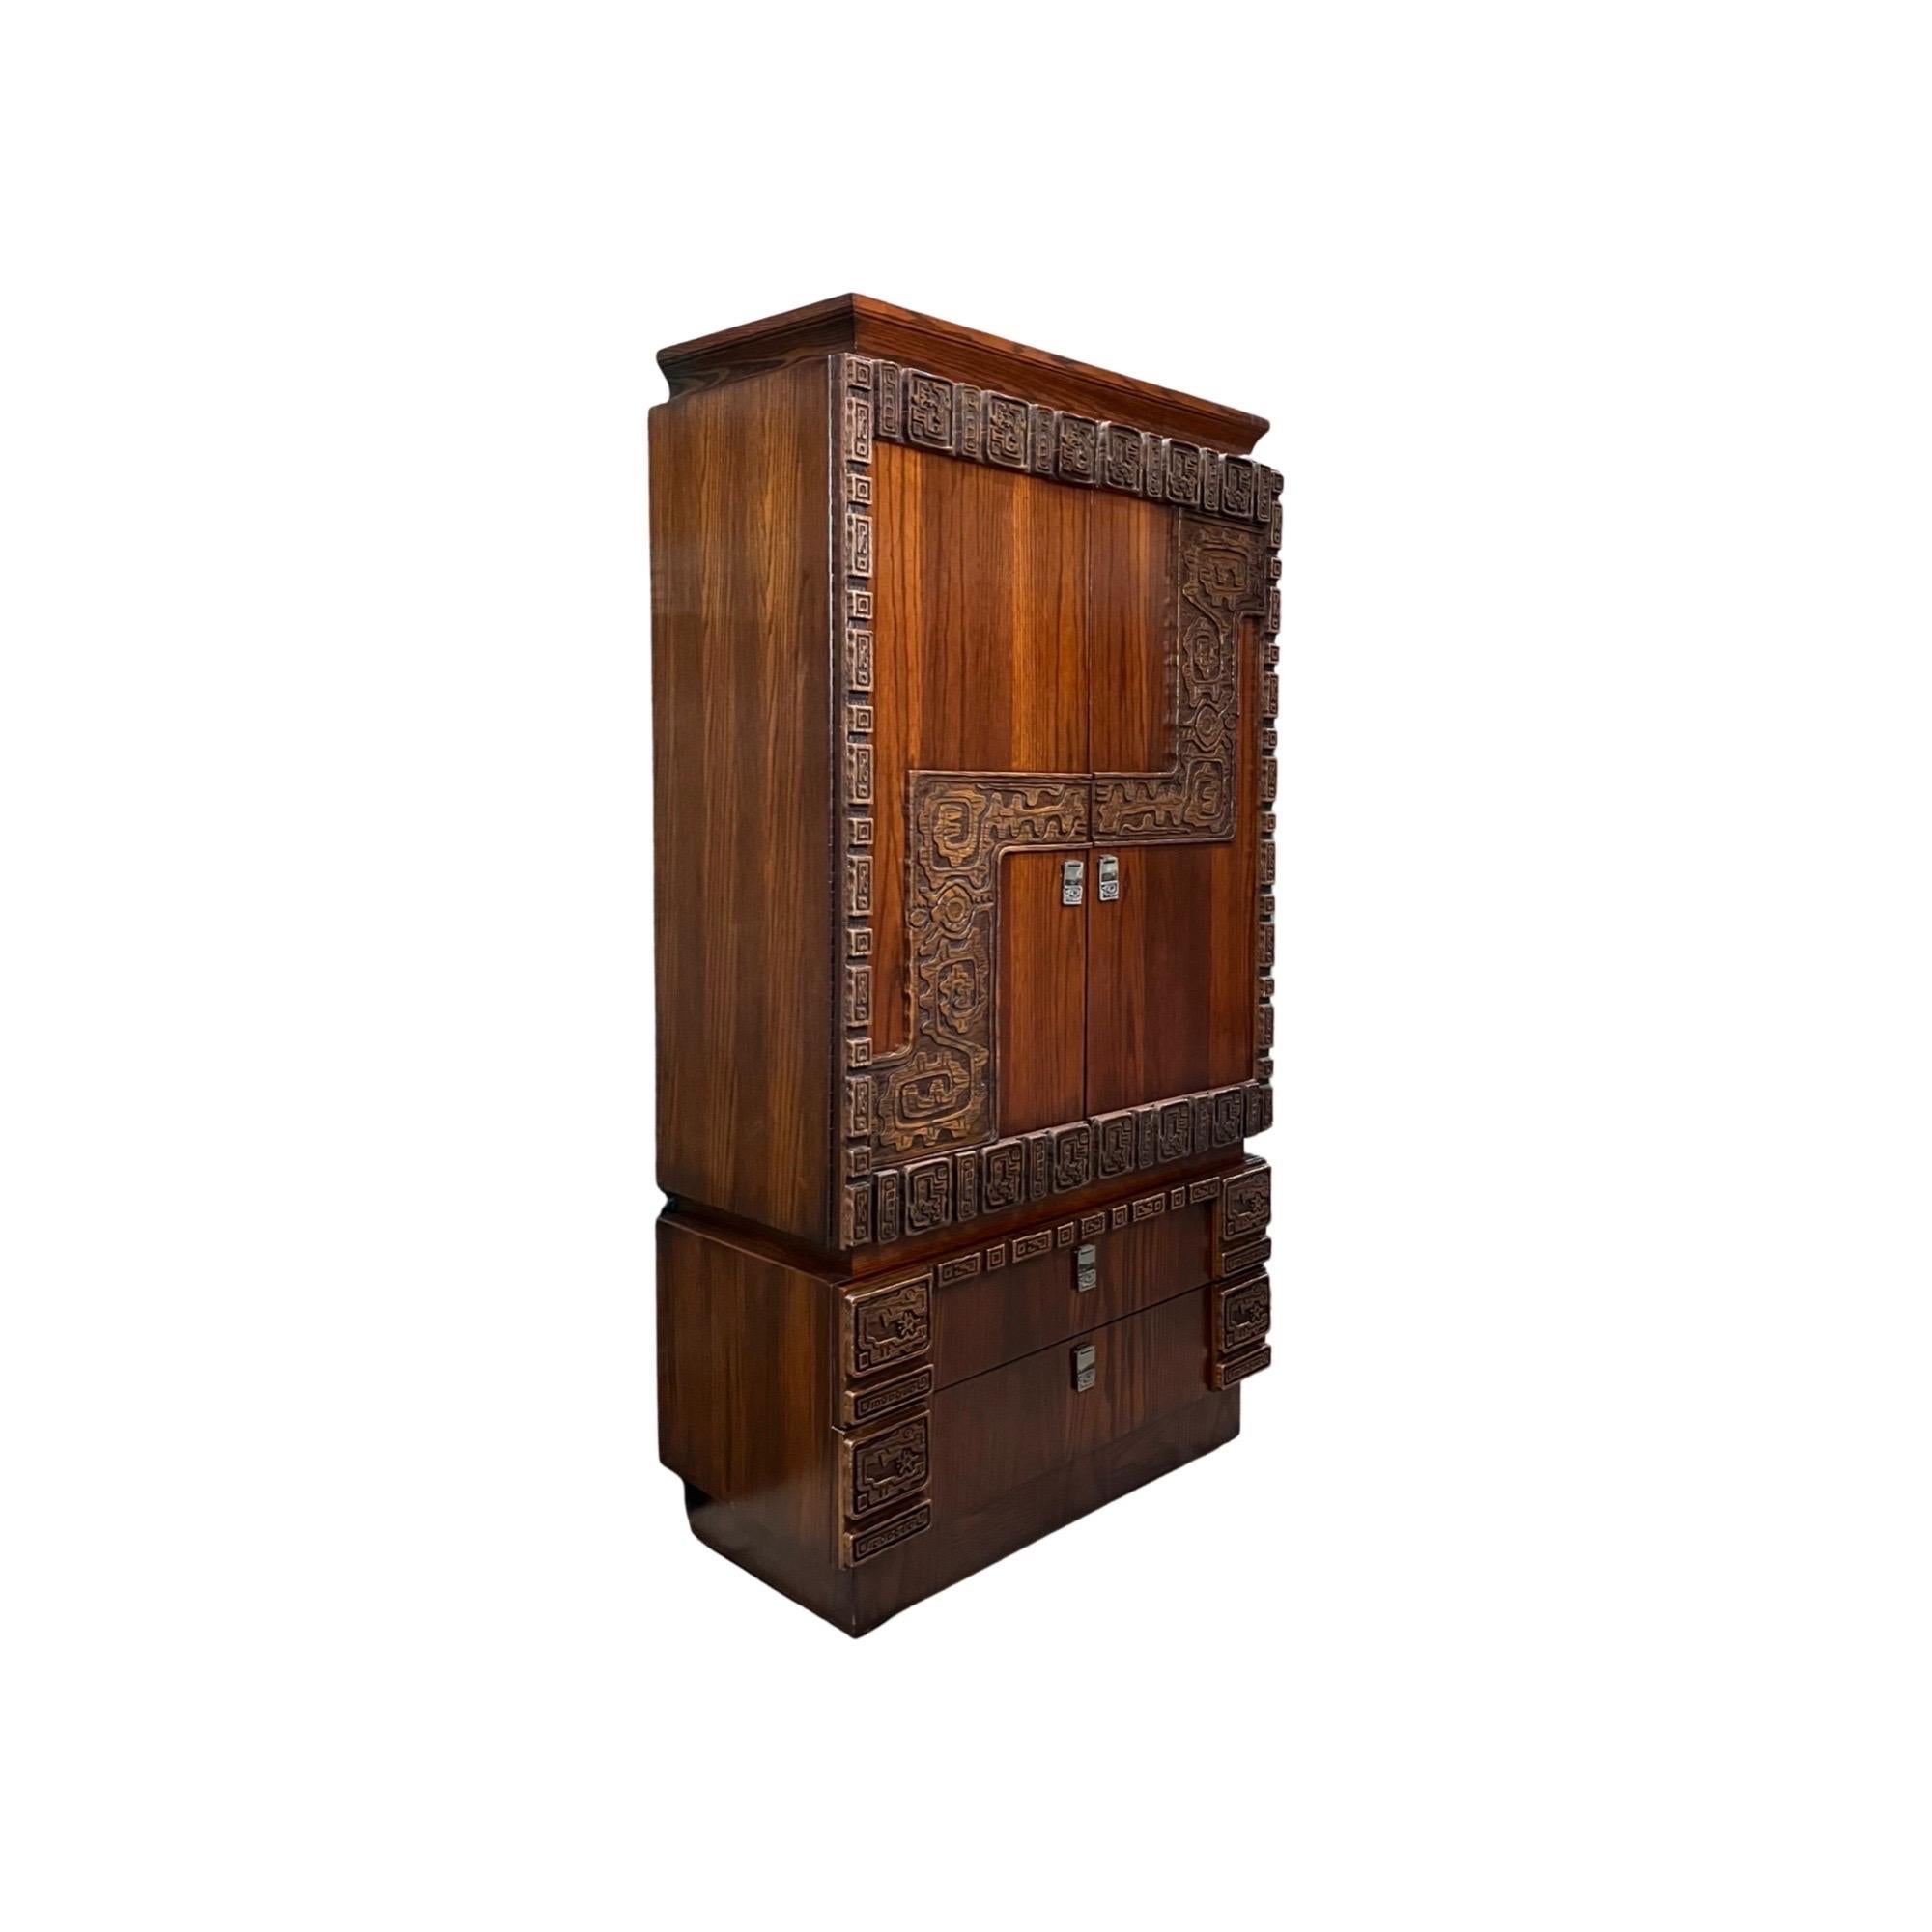 Canadian Brutalist Mid-Century Modern Mayan Style oak Armoire. A one of a kind Grand Armoire makes a statement in any room and provides ample storage at the same time. Detailed patterns throughout the Armiore feature intricate Mayan style carvings